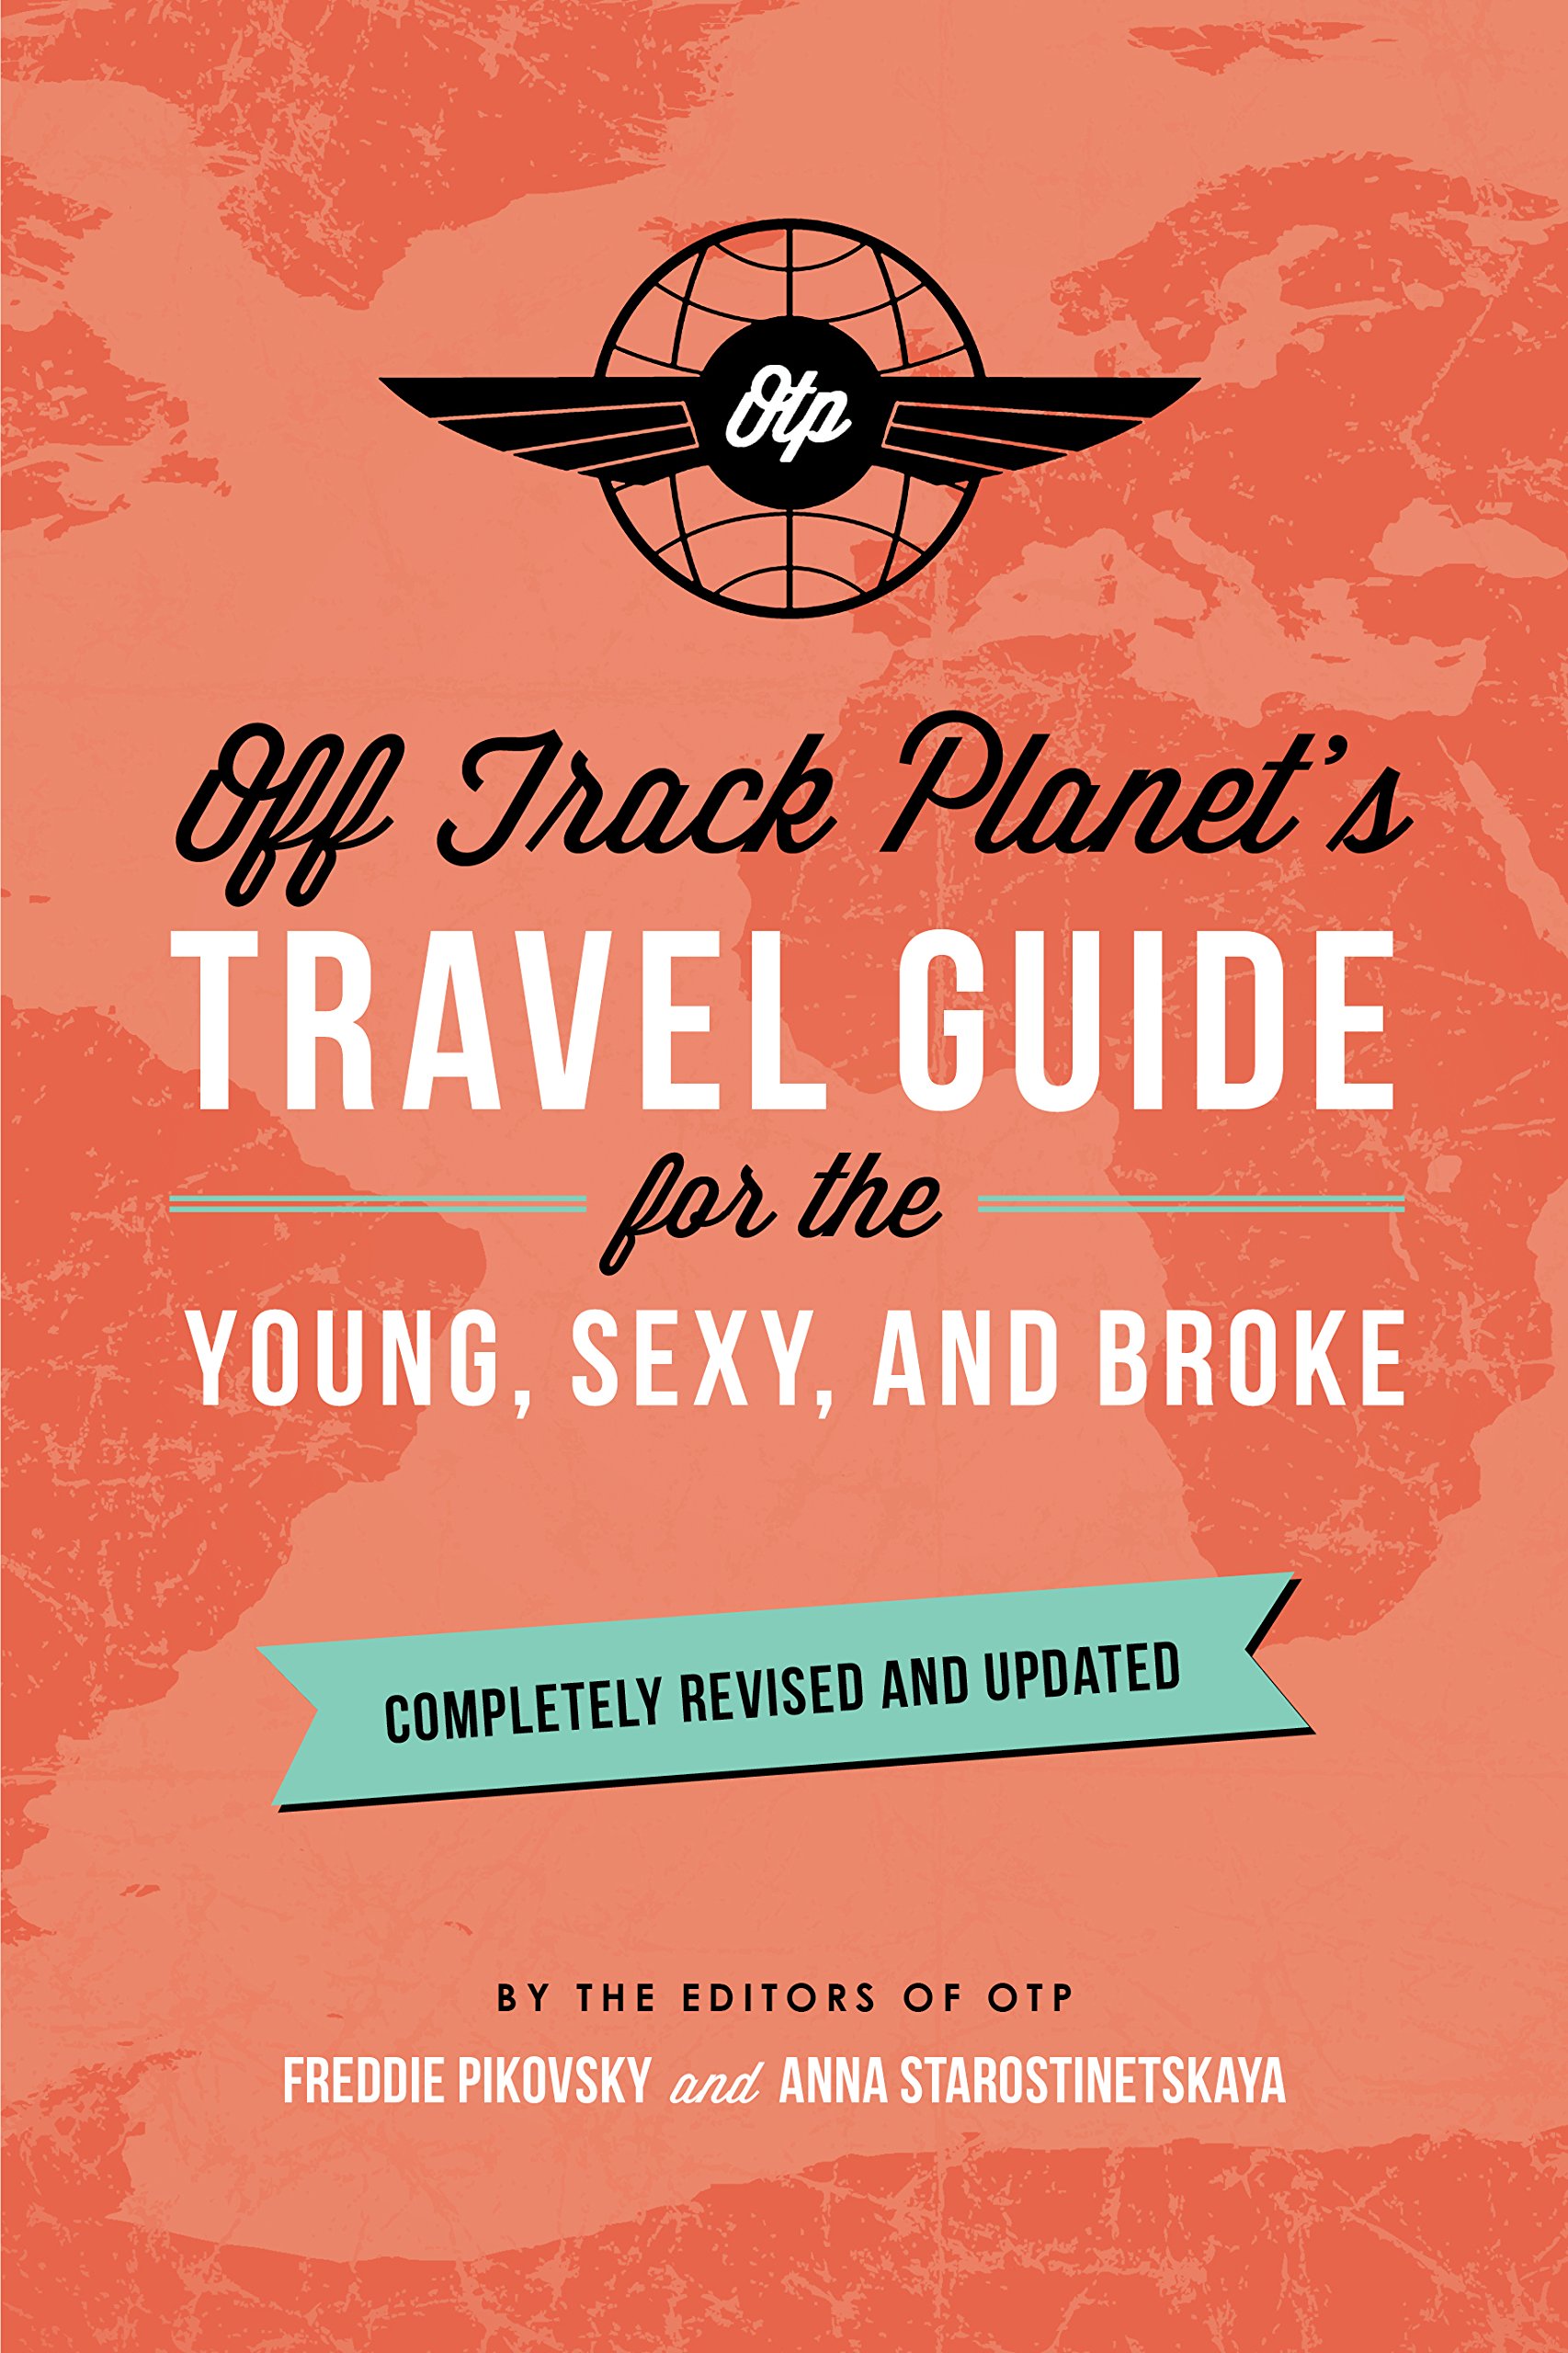 Off Track Planet&#039;s Travel Guide for the Young, Sexy, and Broke